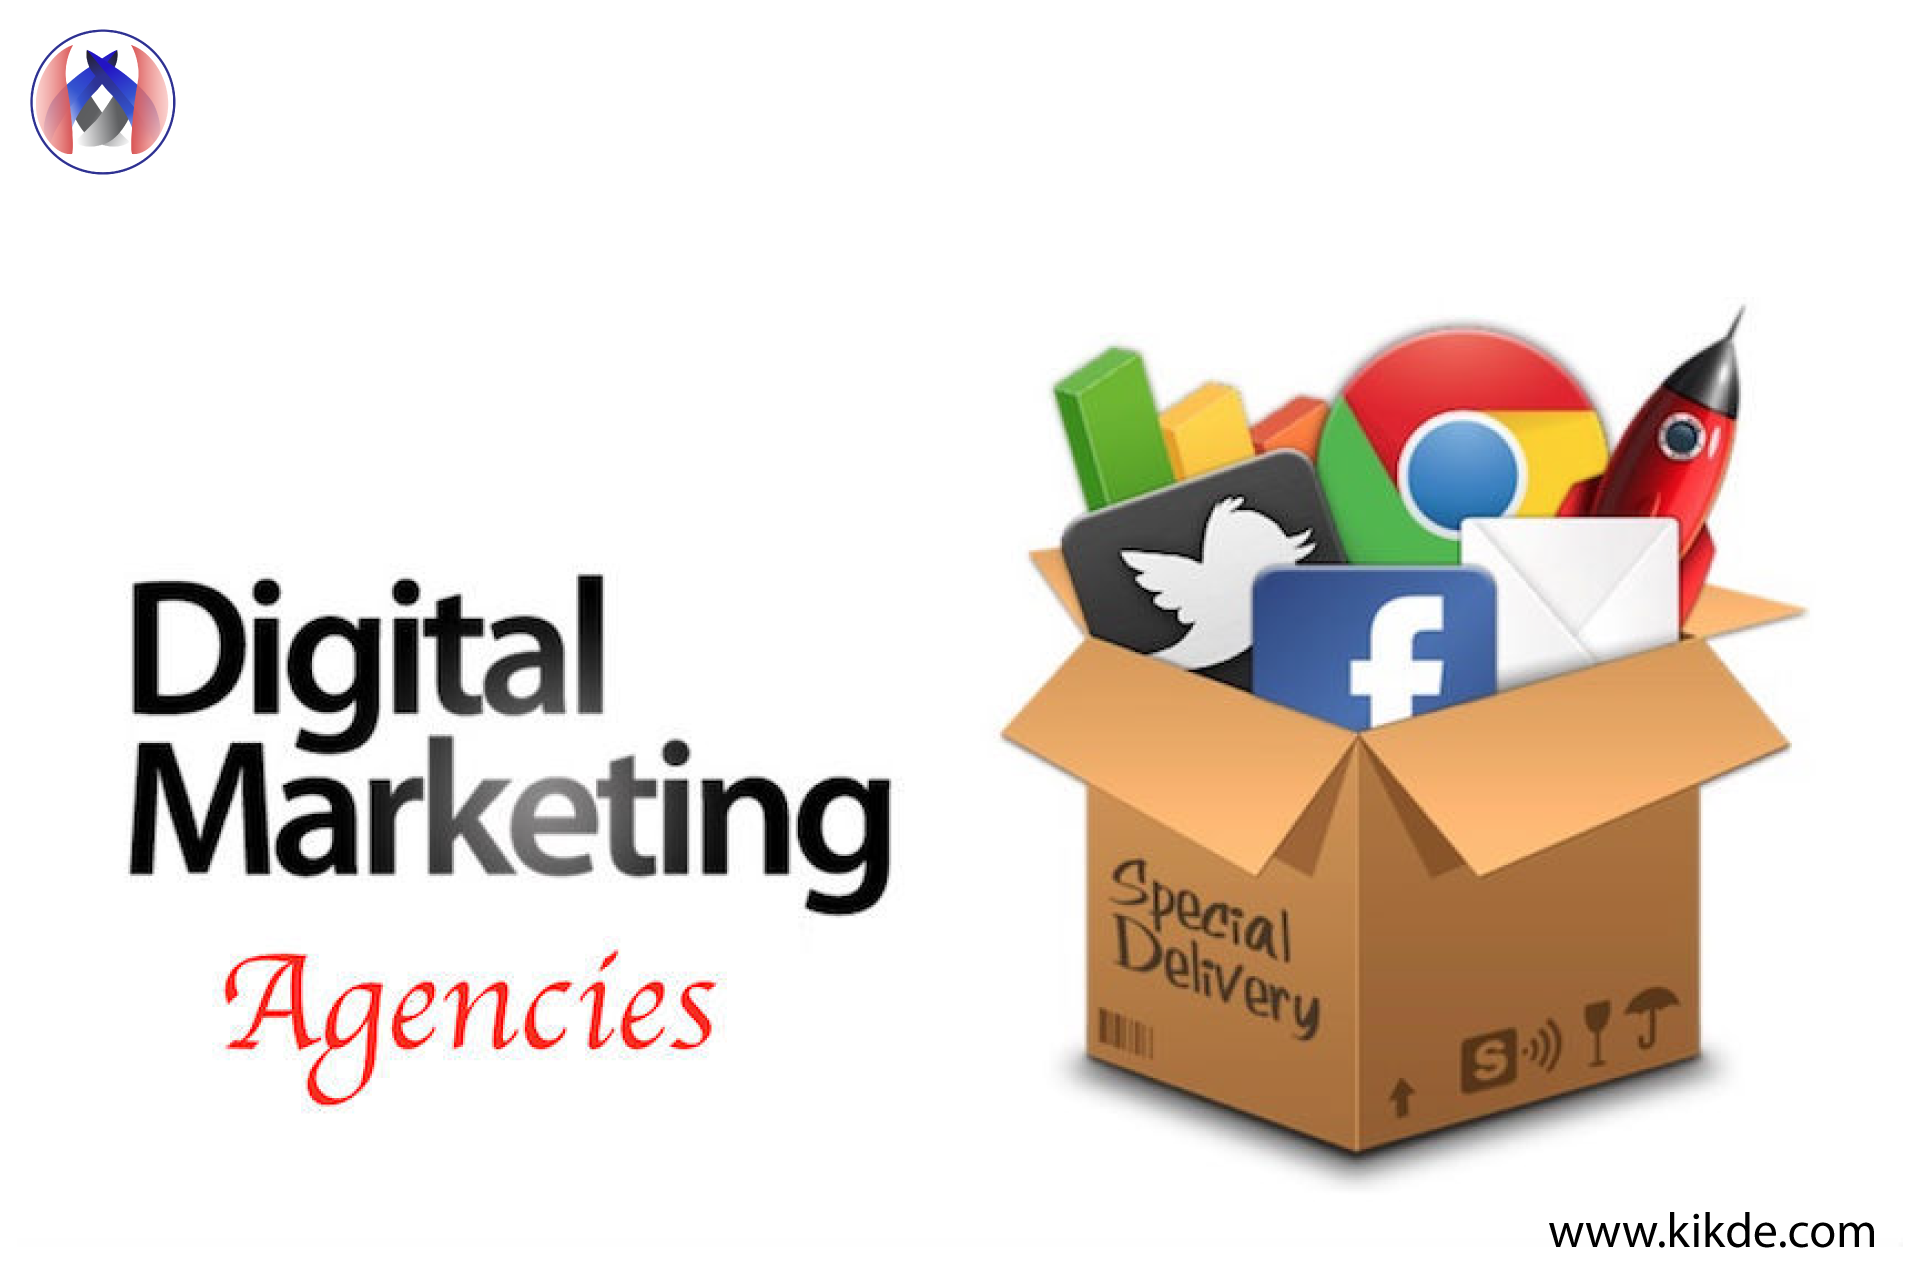 Are you thinking about starting your digital marketing agency?